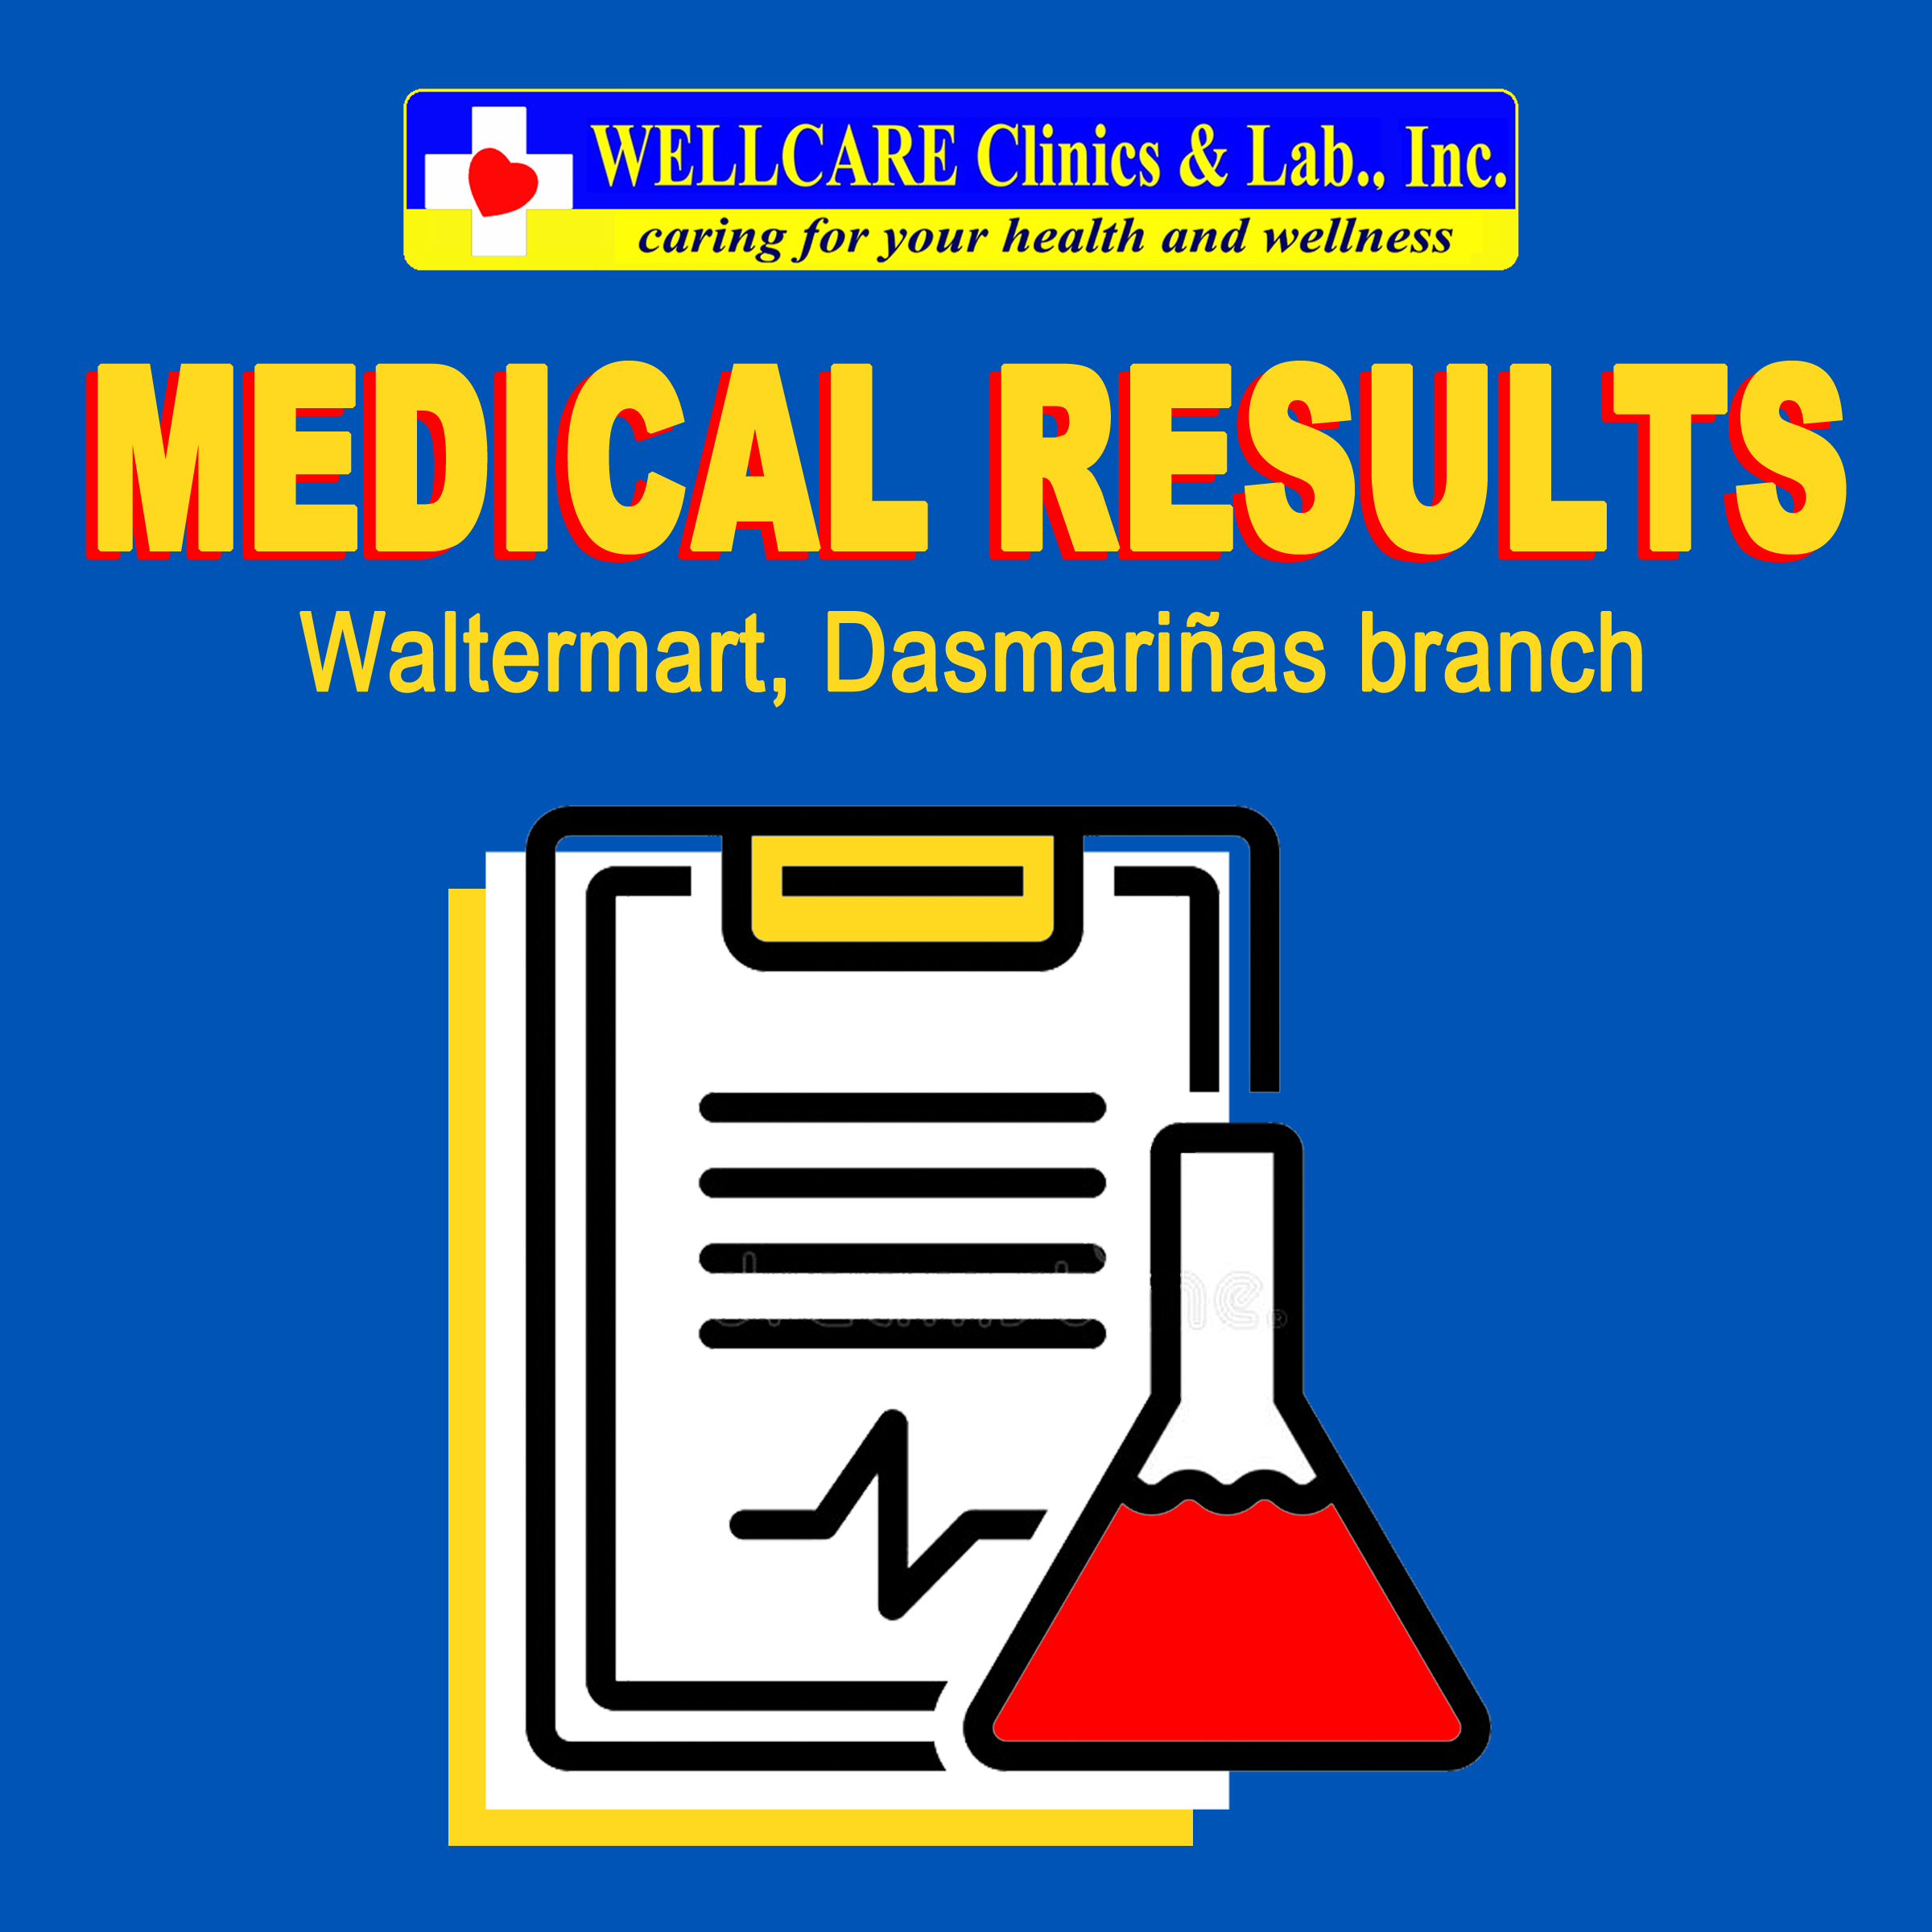 <3 To our beloved customers <3 To claim your Medical Results from Wellcare Waltermart Dasmarinas Branch, please proceed to our Burol Branch located at Gov. D. Mangubat Ave. Burol Main, Dasmariñas, Cavite. The clinic will be open Mondays to Saturdays, 8:00 am to 5:00 pm. Please bring your receipts as reference. Customer Care Service hotline: (046)416.7068 0925.5167136 0925.5505788 0925.5167134 We care, Your Wellcare Family #IAmWellcare #stopcovid19 #Dasmariñas